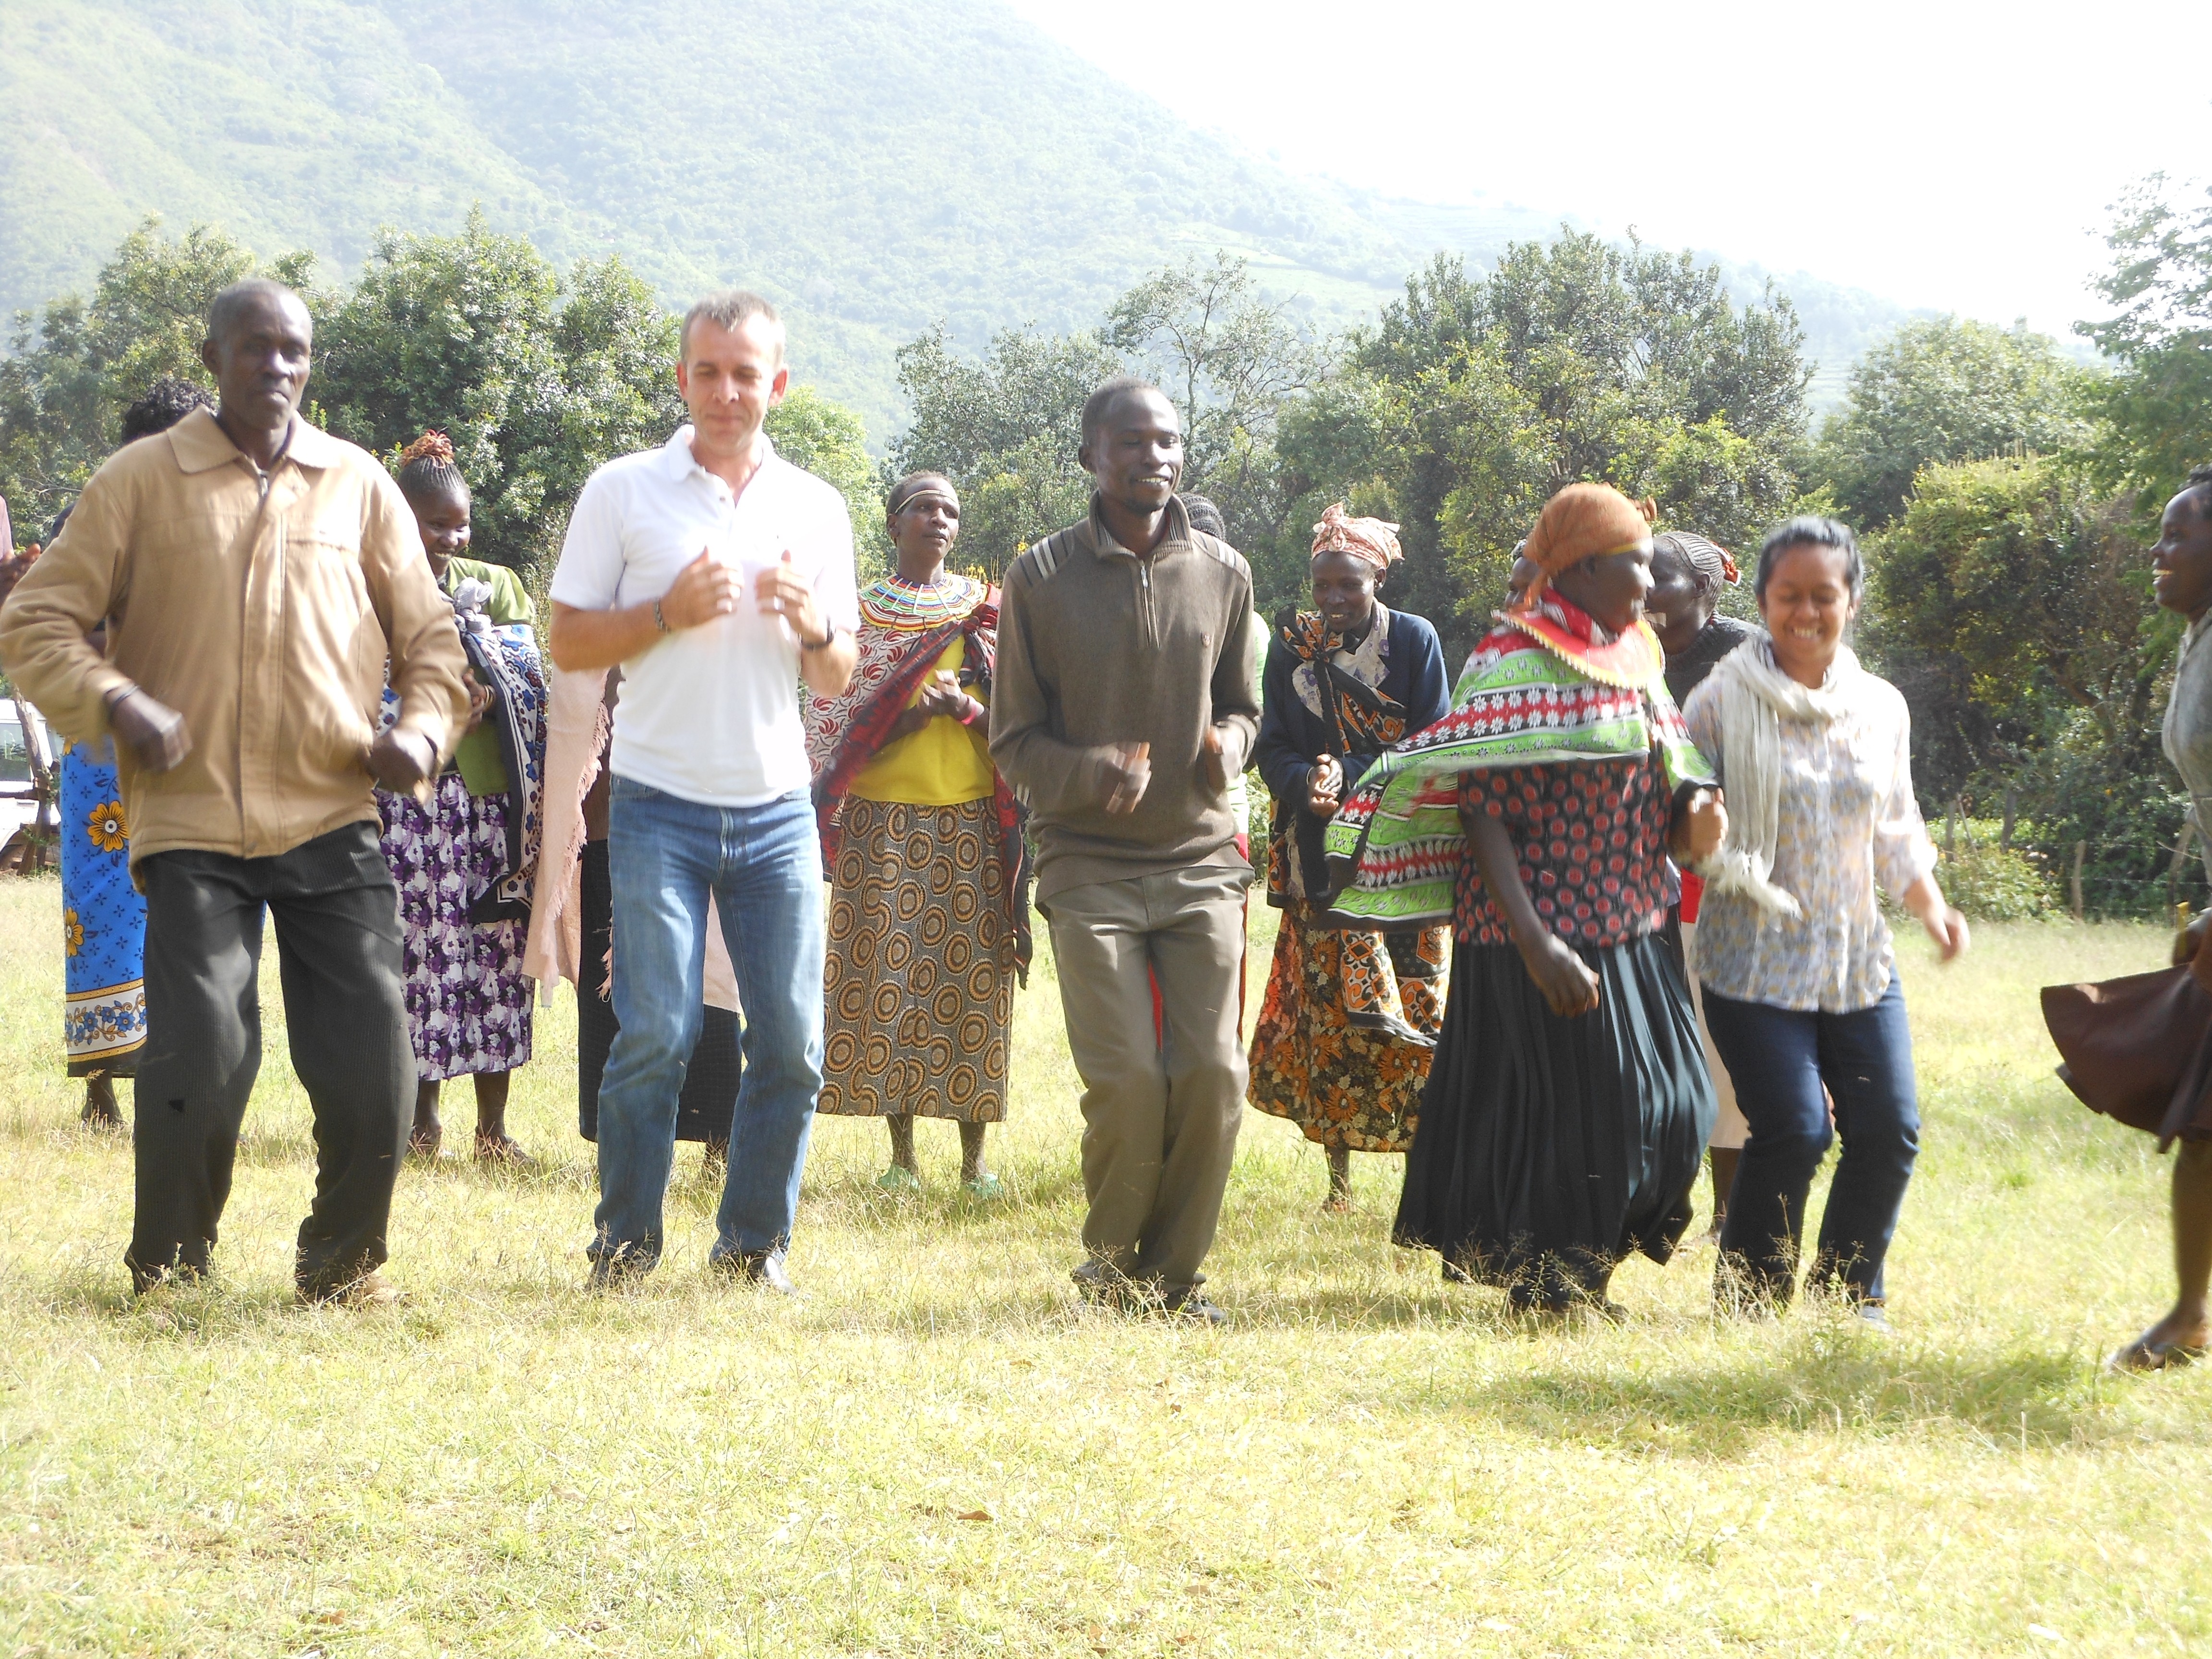 Tahina (r) participating in a dance party during a visit in Kenya